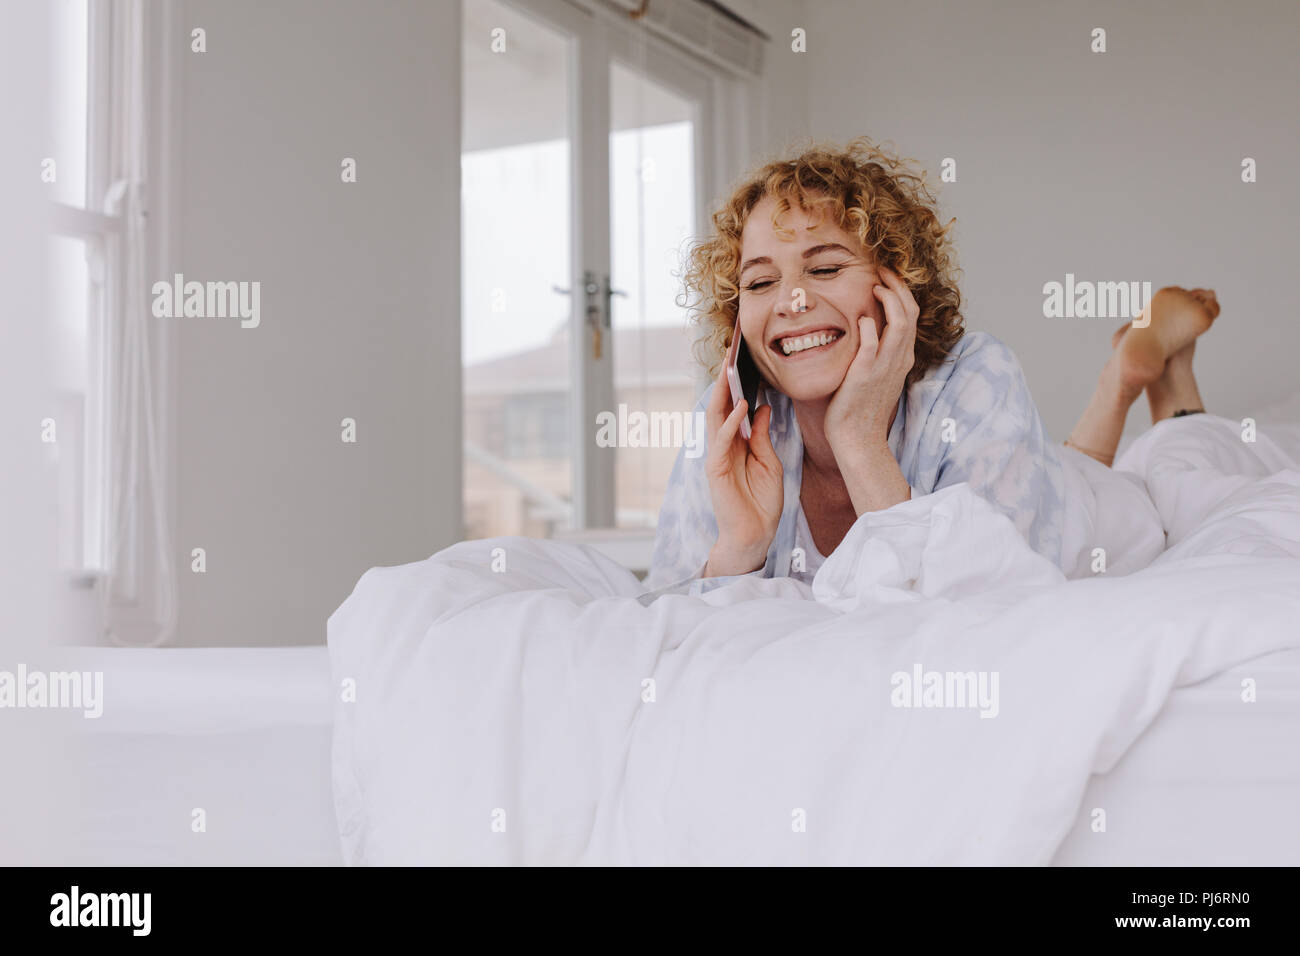 Smiling woman talking on mobile phone lying in bed after waking up in the morning. Stock Photo